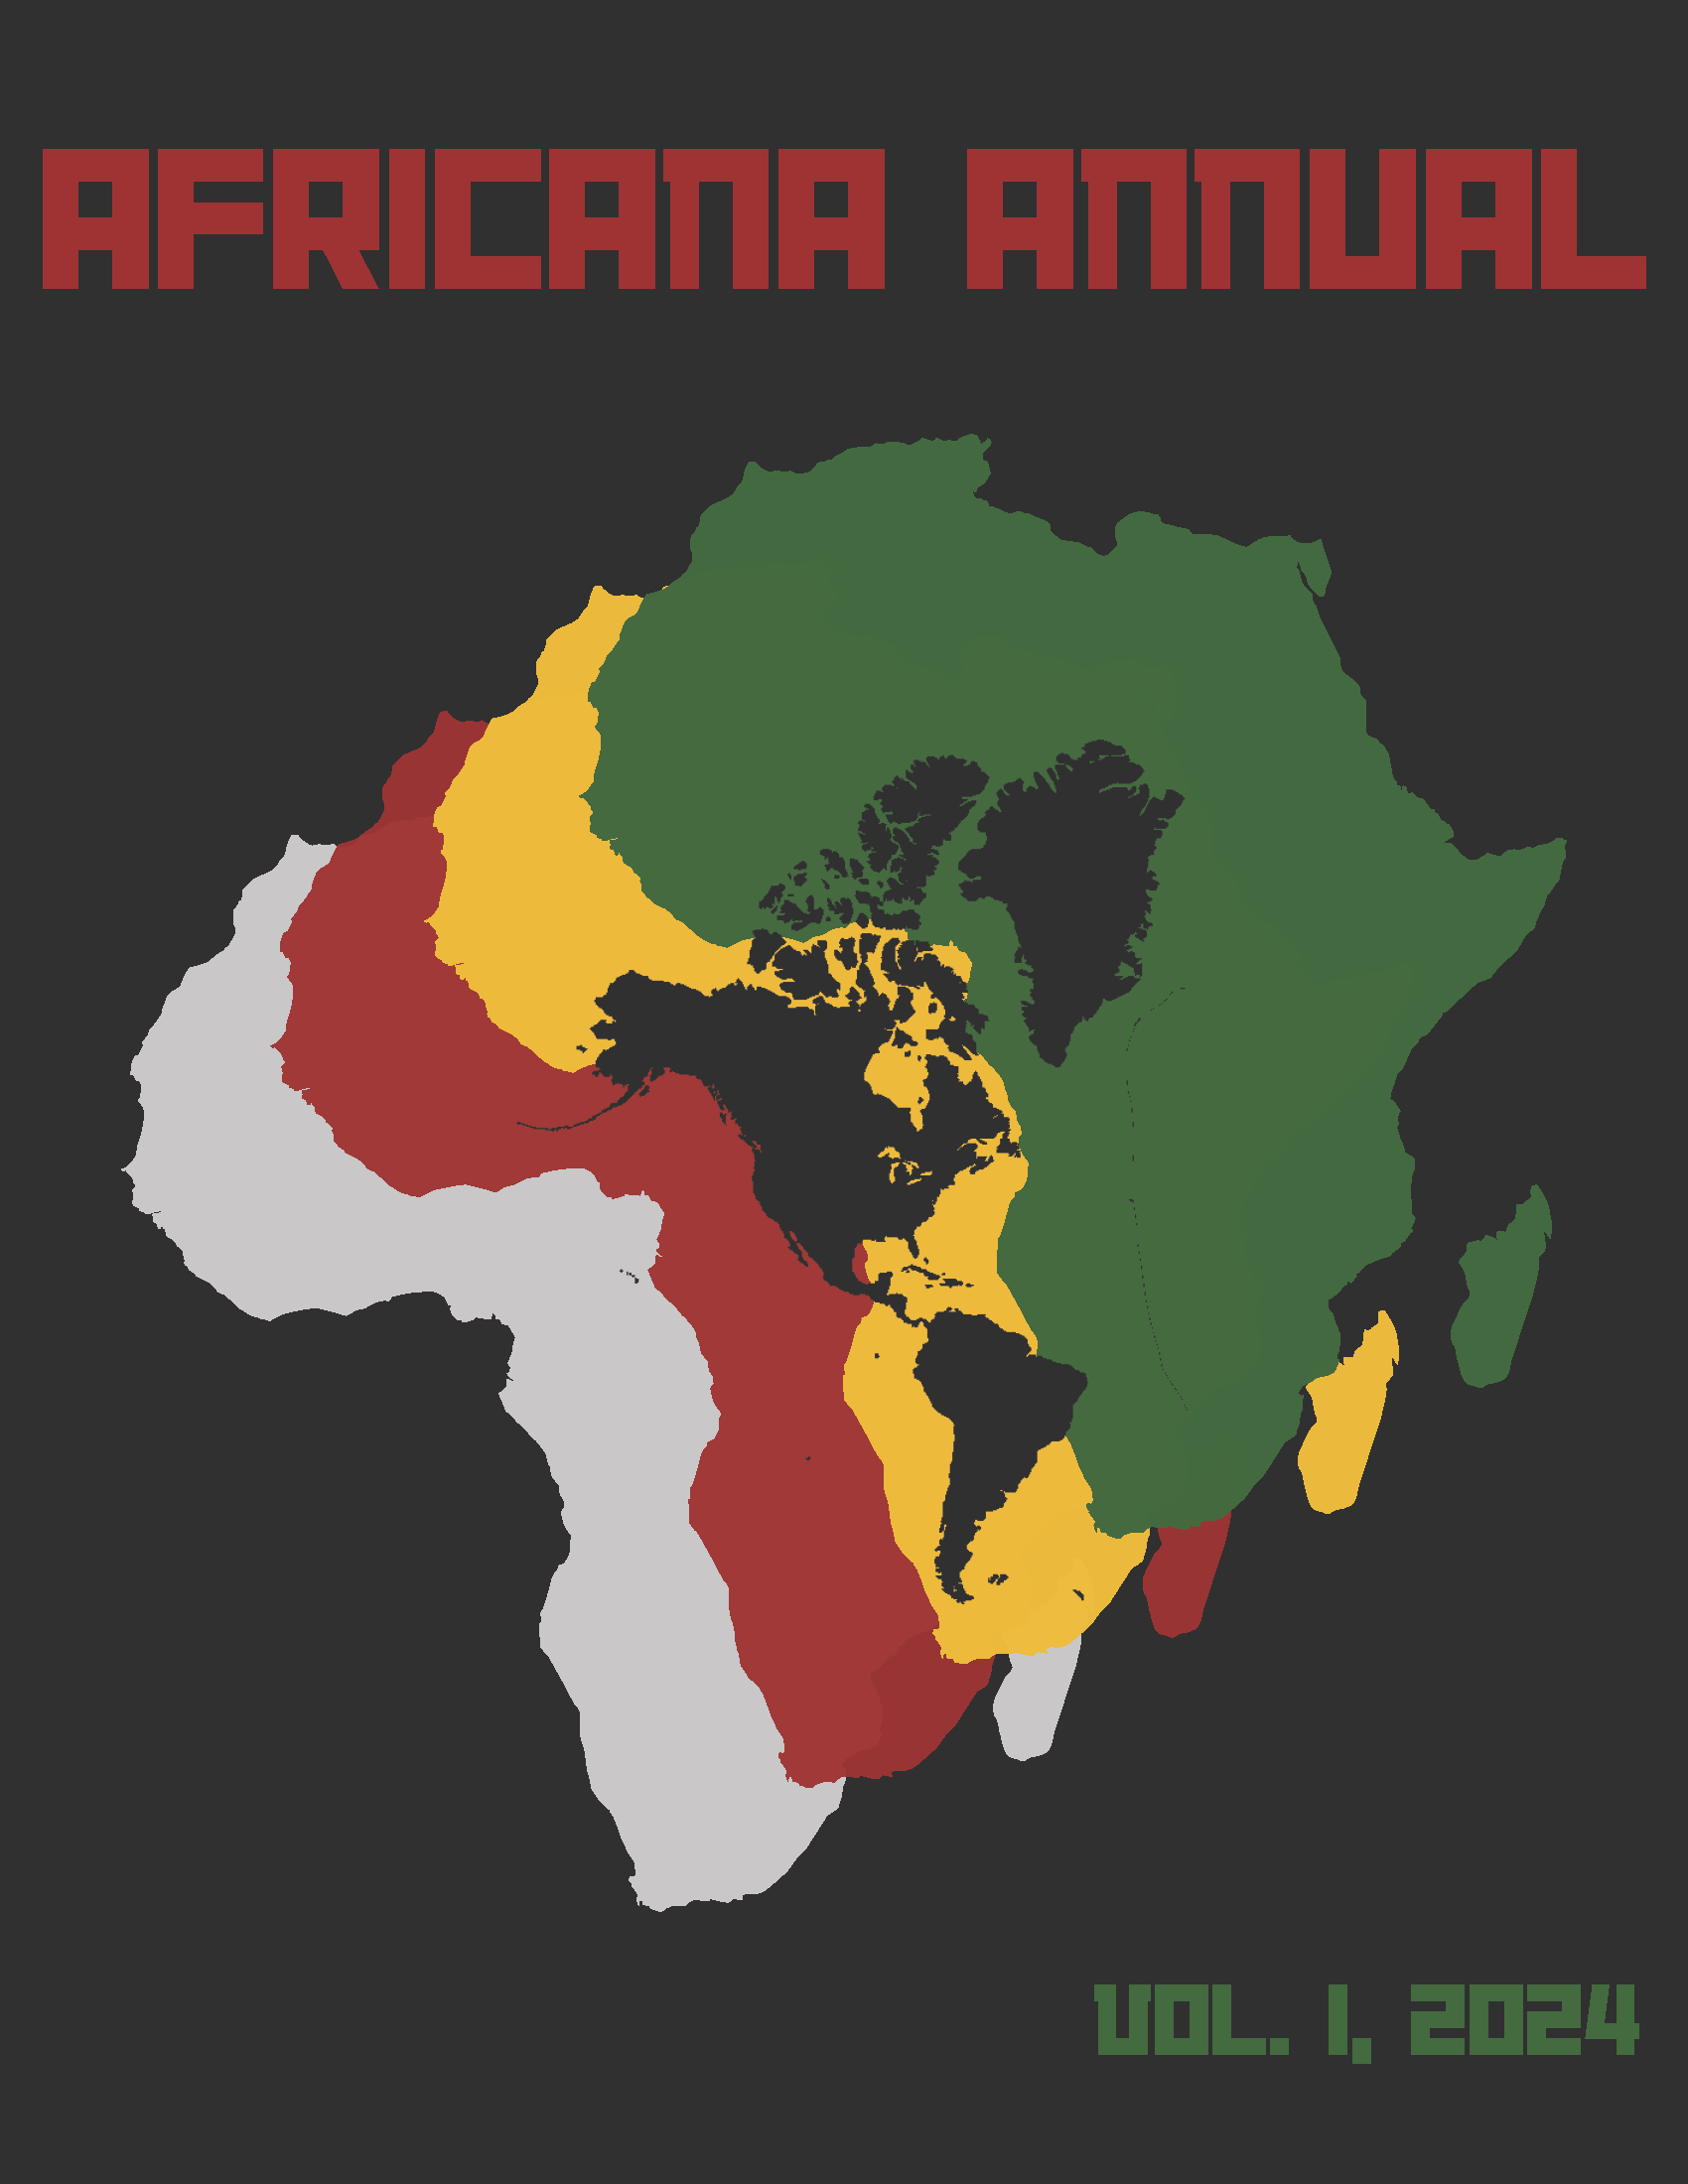 The outline of the continent of Africa in gray, red, yellow, and green.